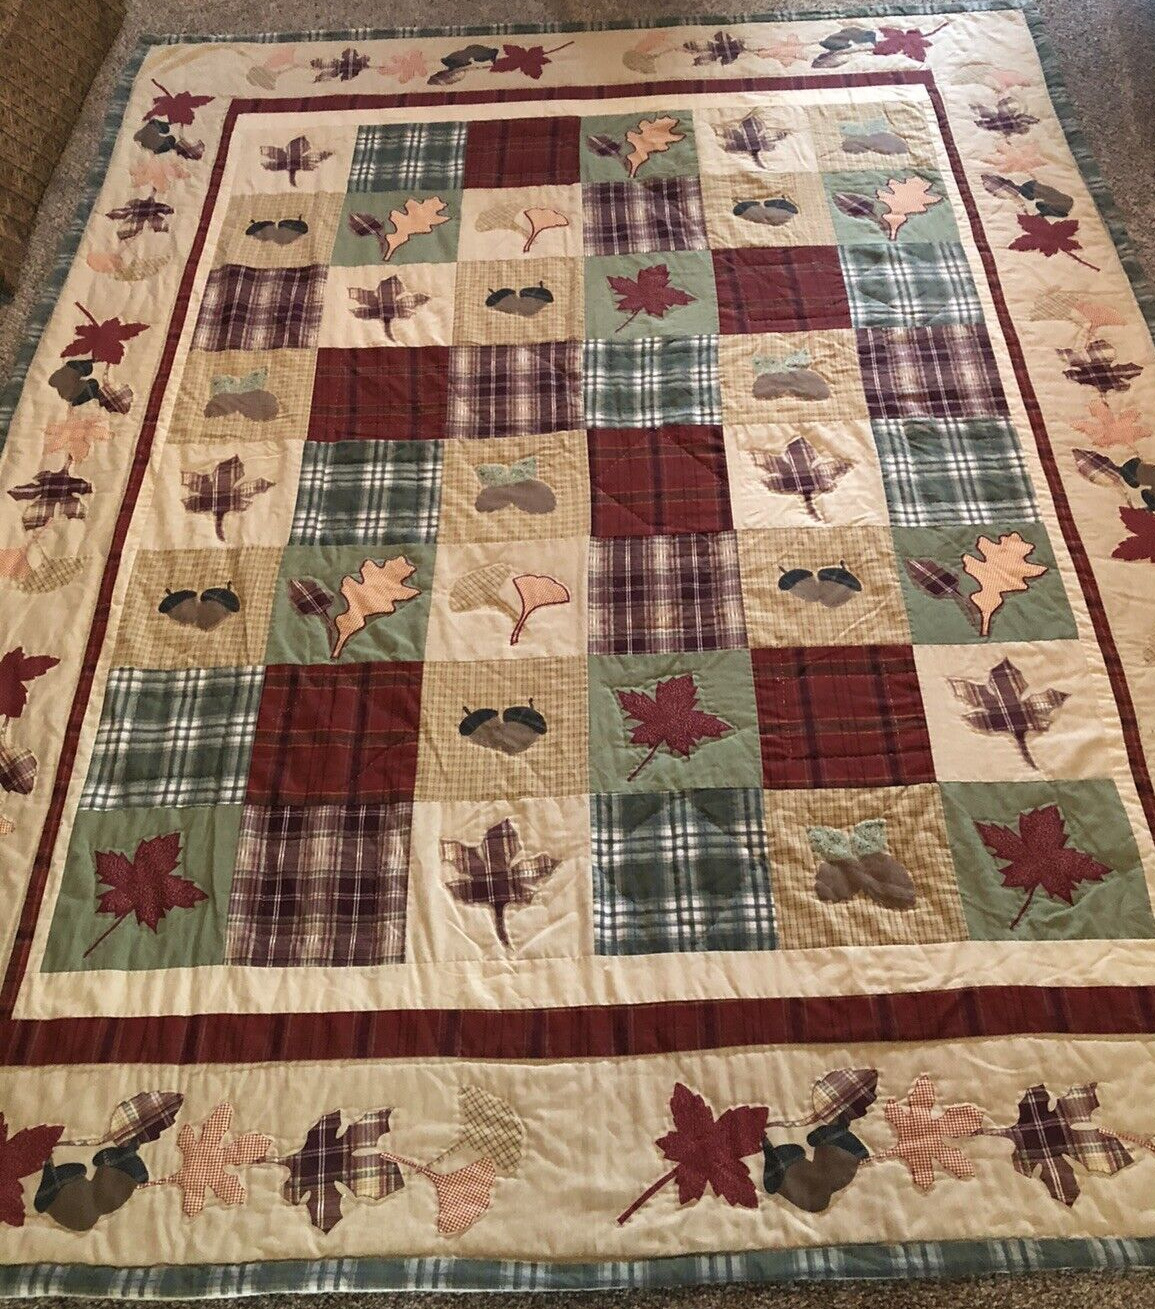 Patchwork Quilt All Hand Quilted In Multi Earth Tone Colors 86" L. X 66" W.